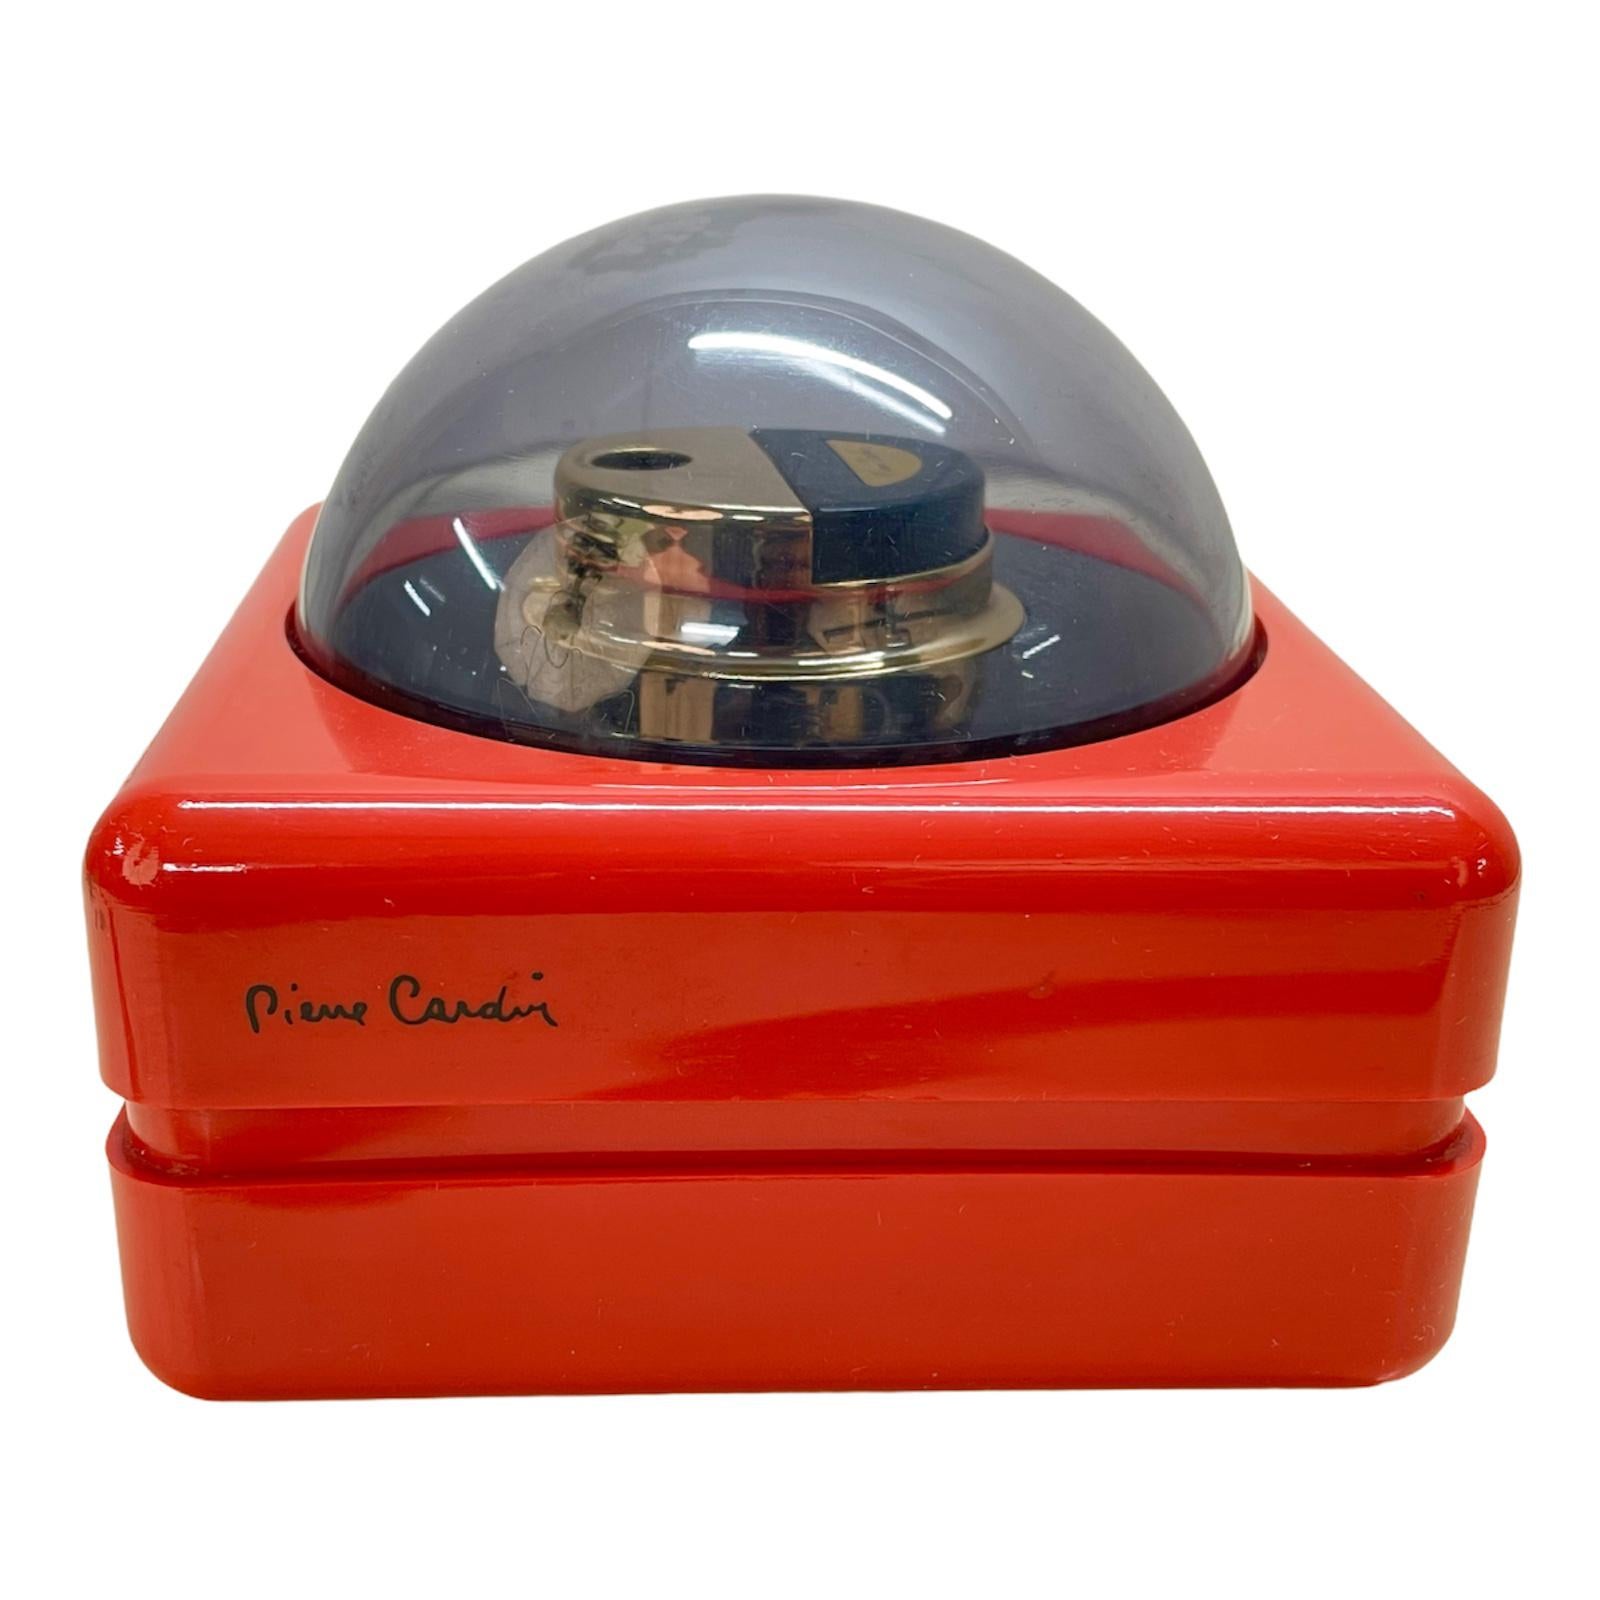 Incredible midcentury red table lighter with smoked plexiglass dome. This piece was designed and signed by Pierre Cardin and produced in France during the 1970s.

The article is endlessly fascinating for not having been used and being brand new.